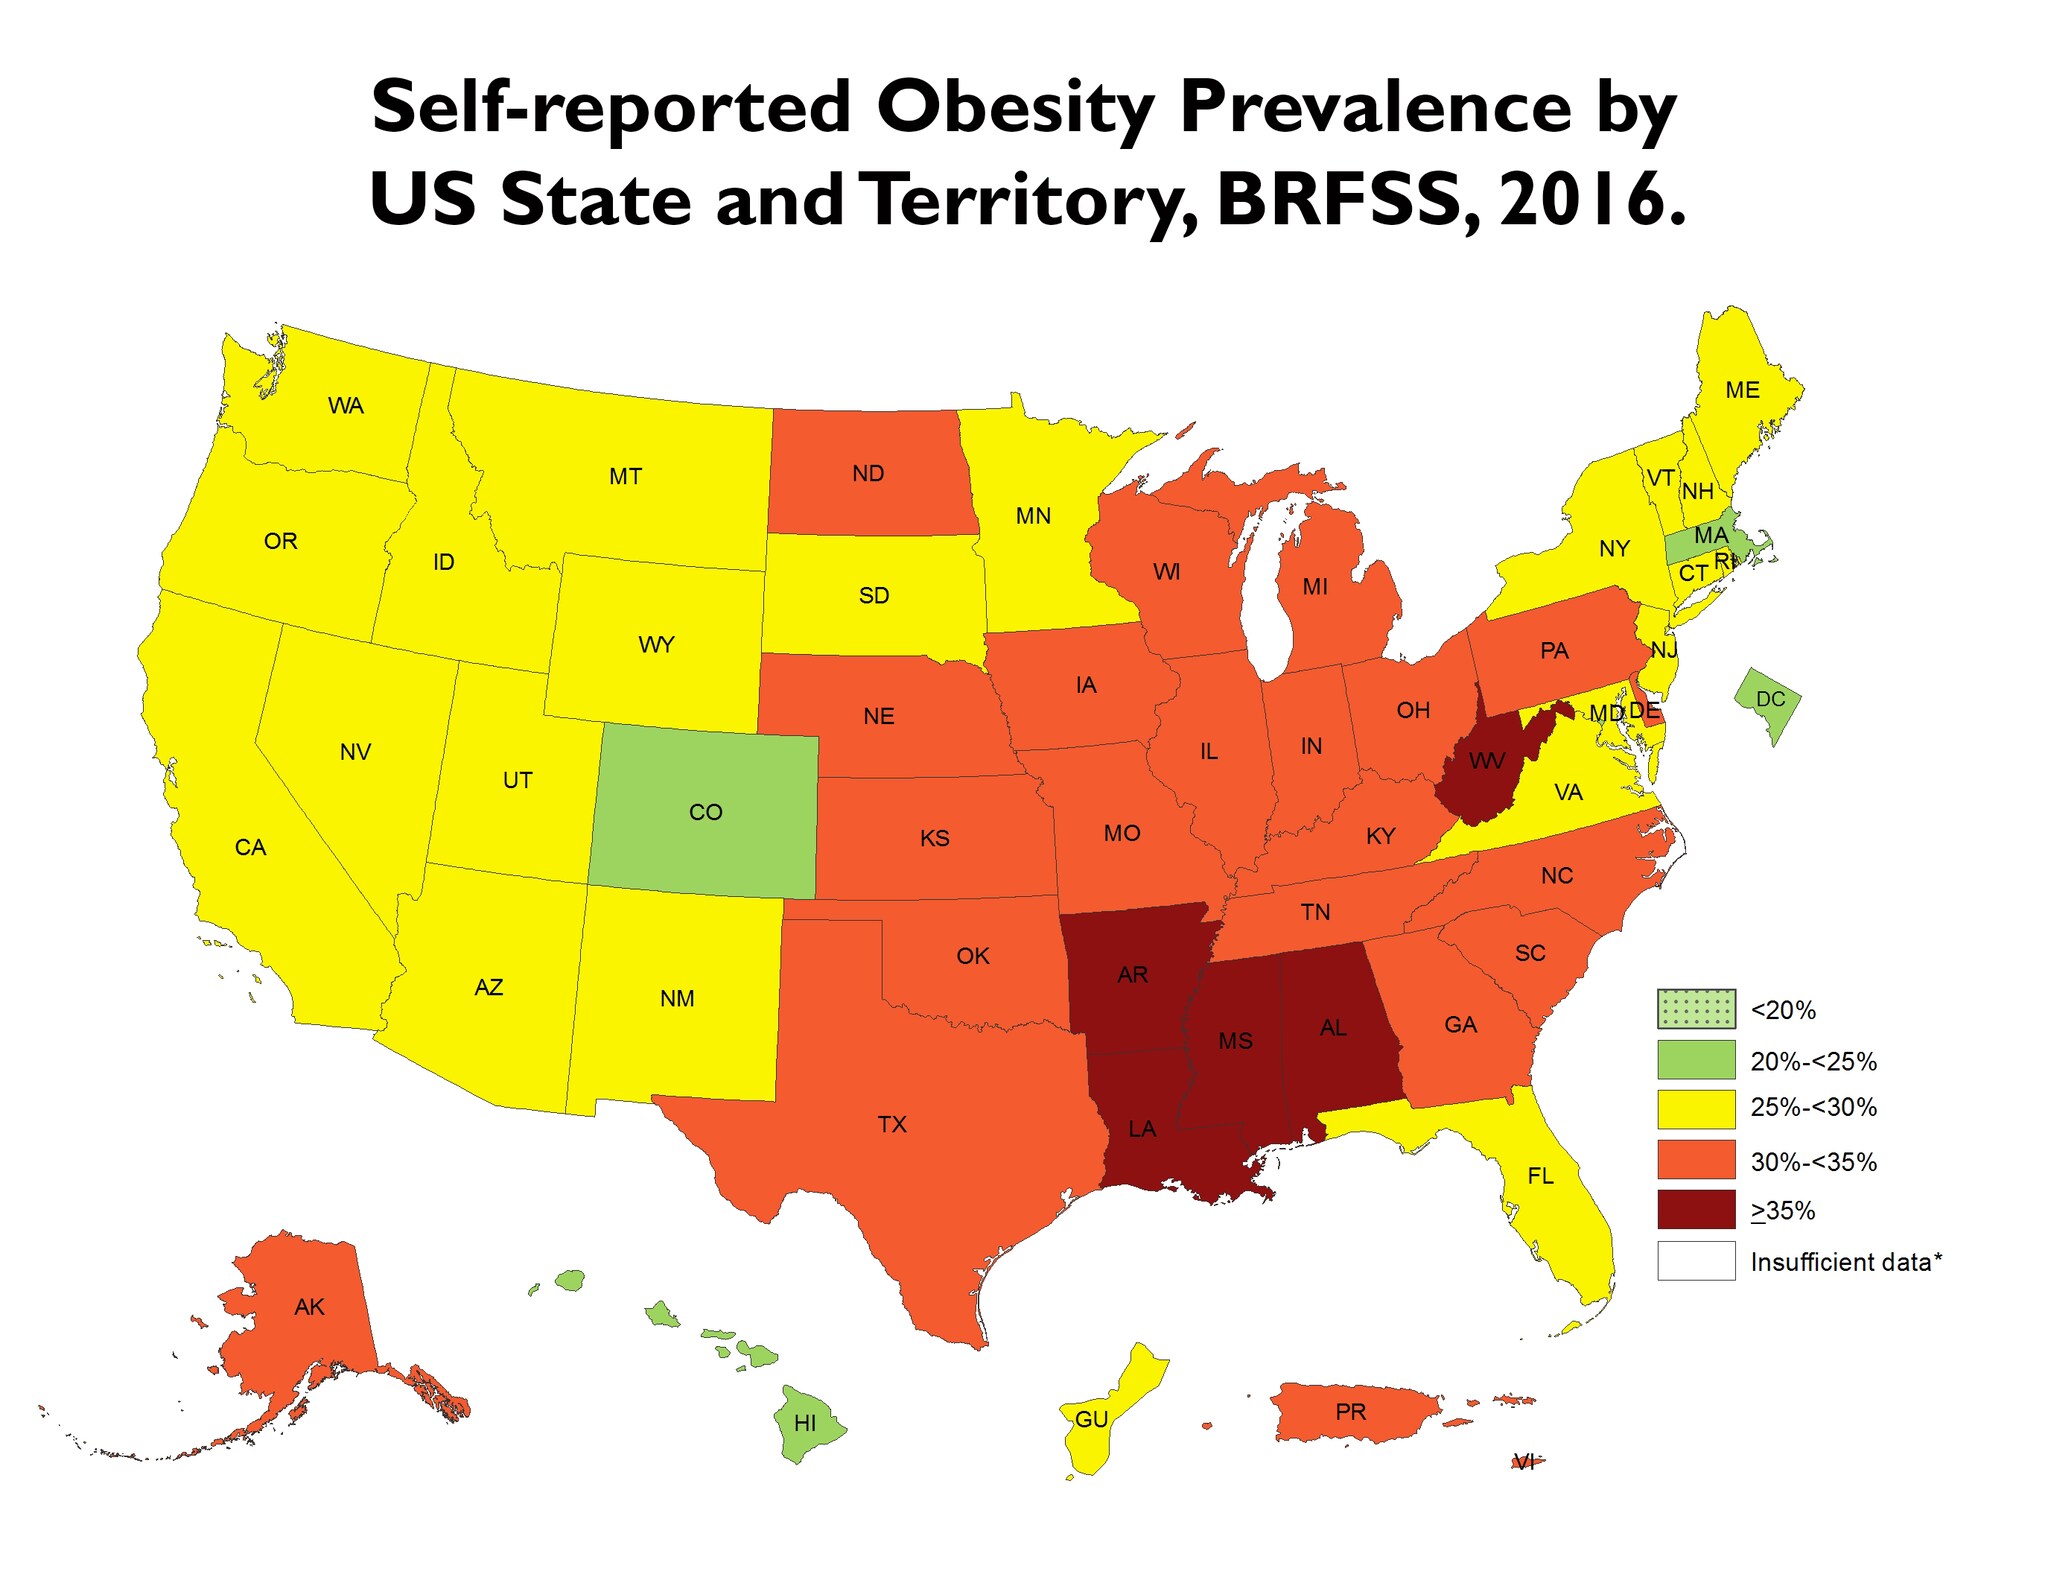 Self-reported obesity prevalence by us state and territory, brfss, 2016